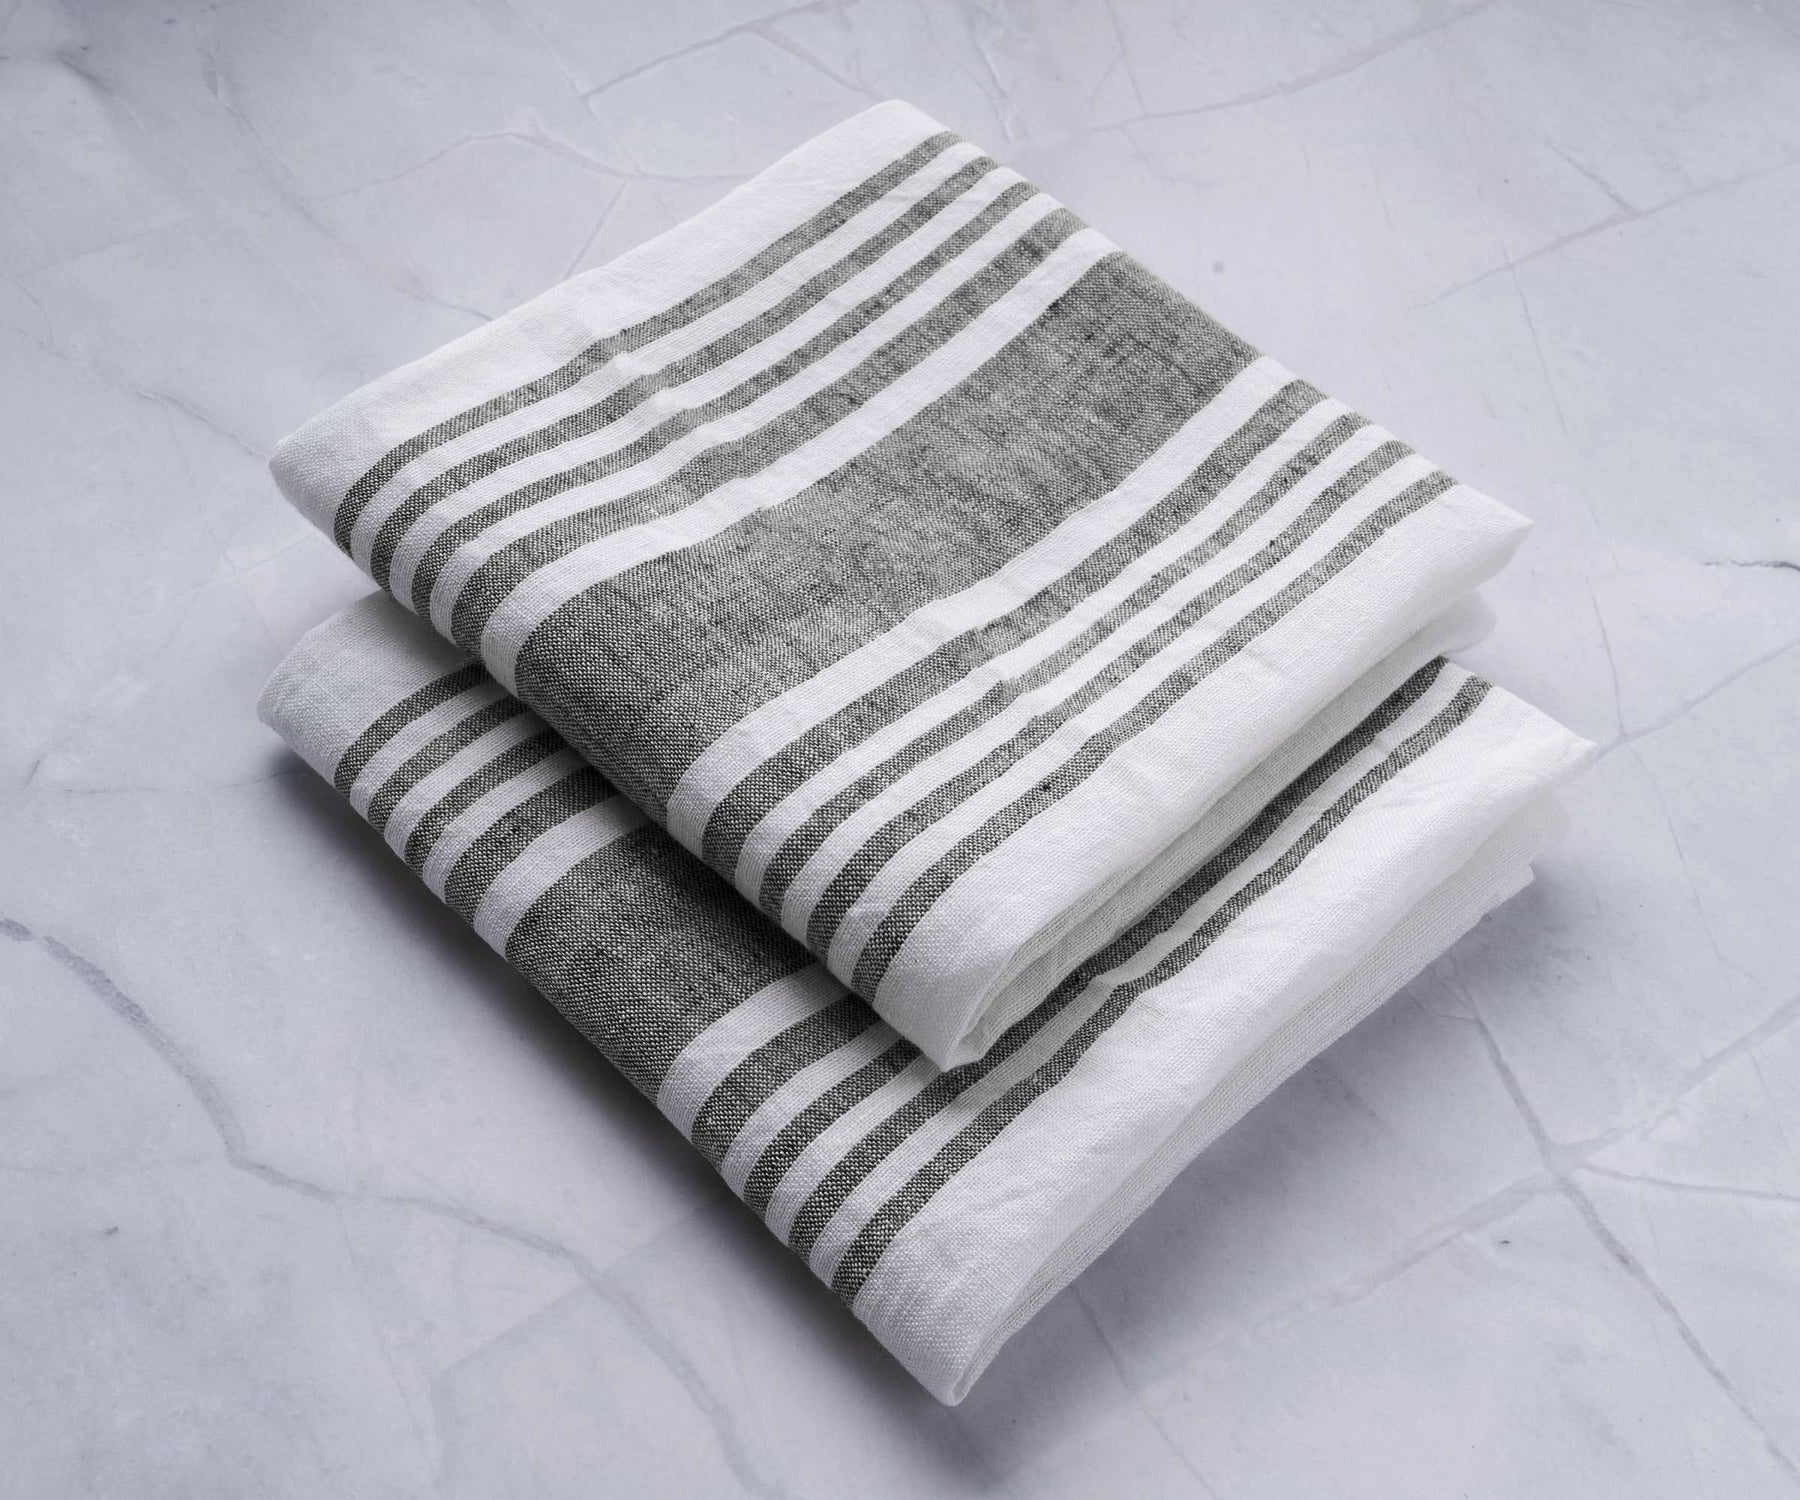 Enhance your kitchen with the timeless charm and practicality of linen kitchen towels and dish towels, combining style and functionality effortlessly.